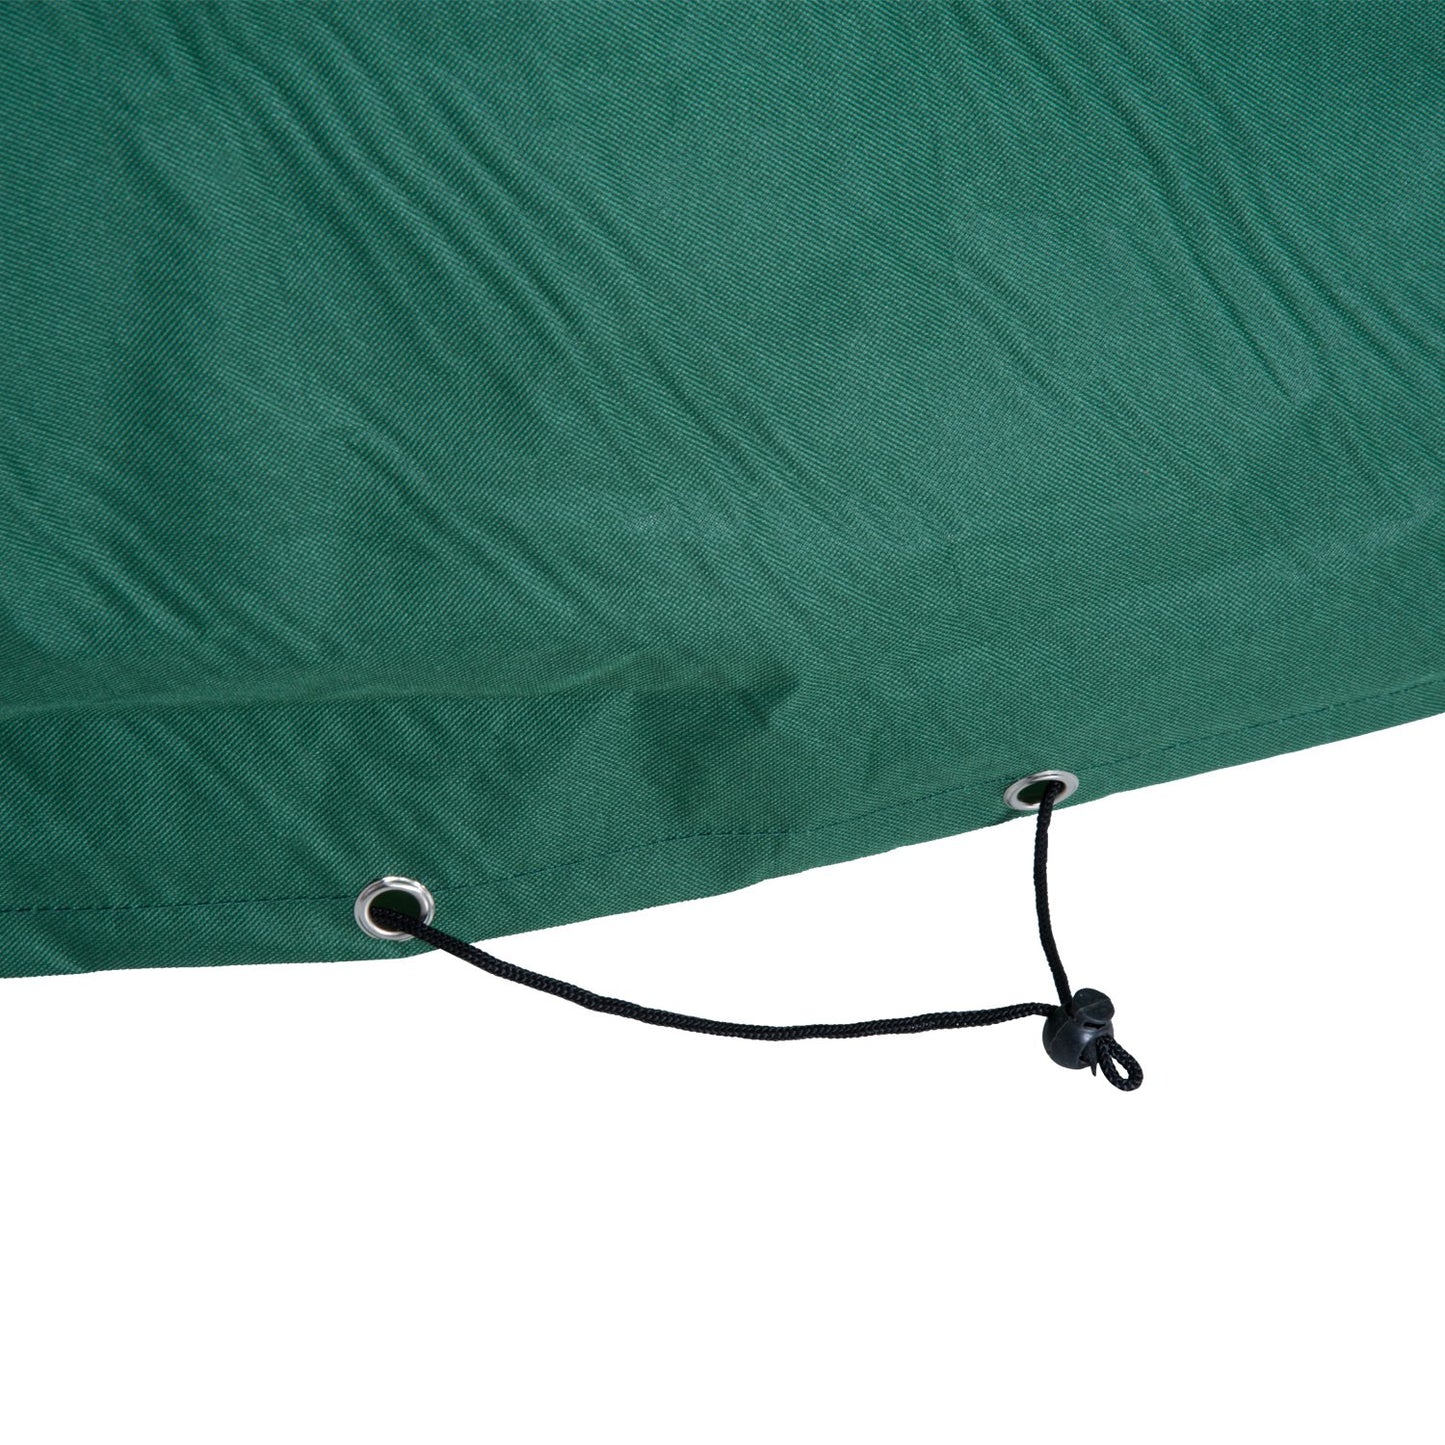 Outsunny Furniture Cover, 222Lx155Wx67H cm-Green